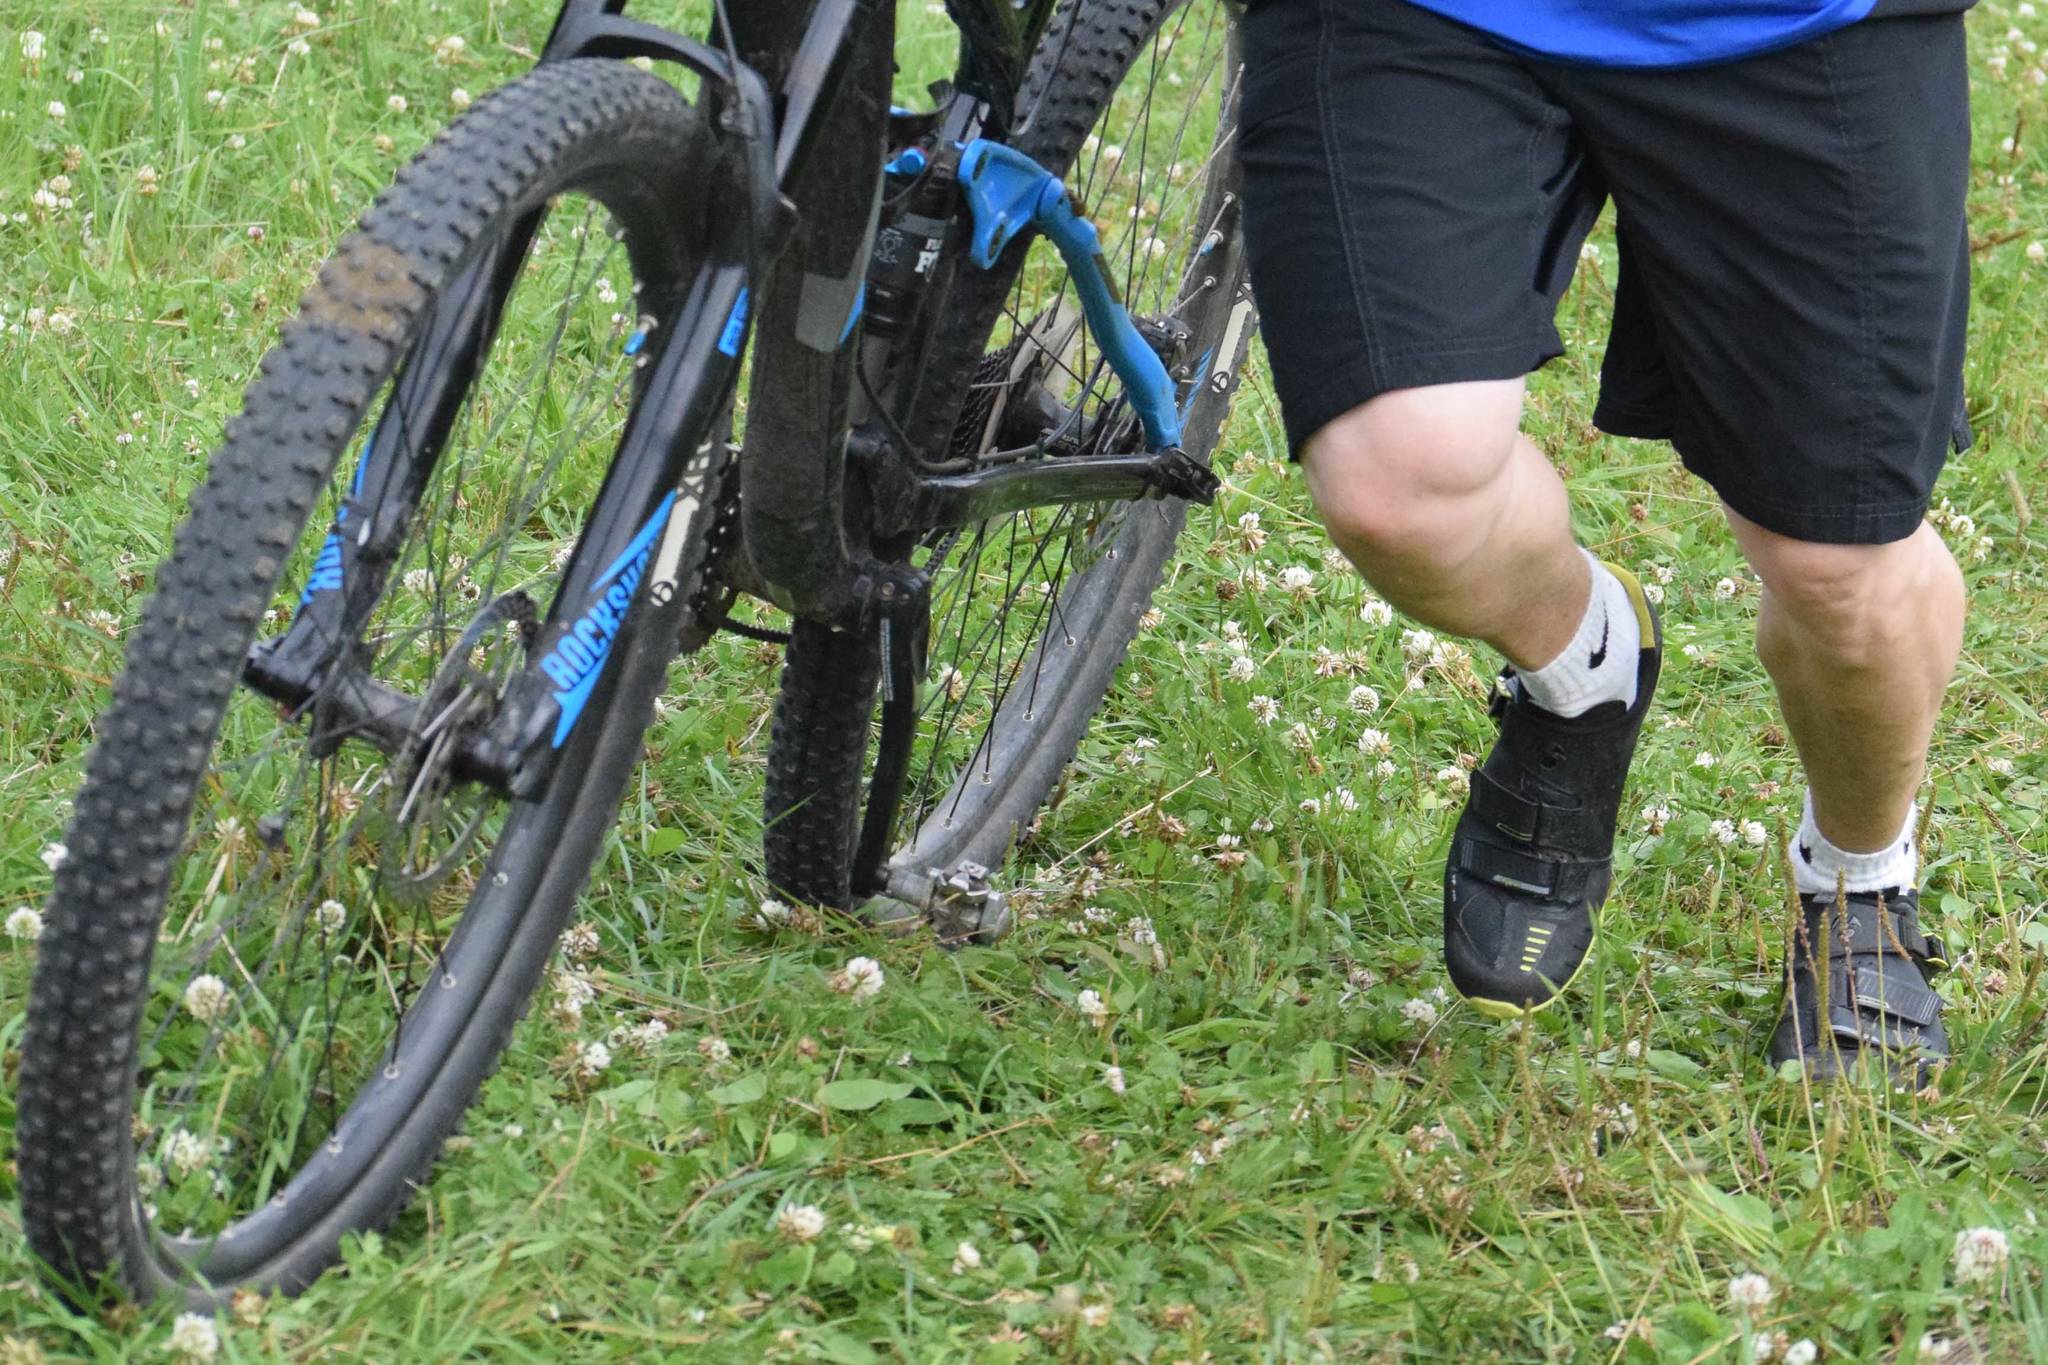 Chainwreck Cyclocross thrives on wet course